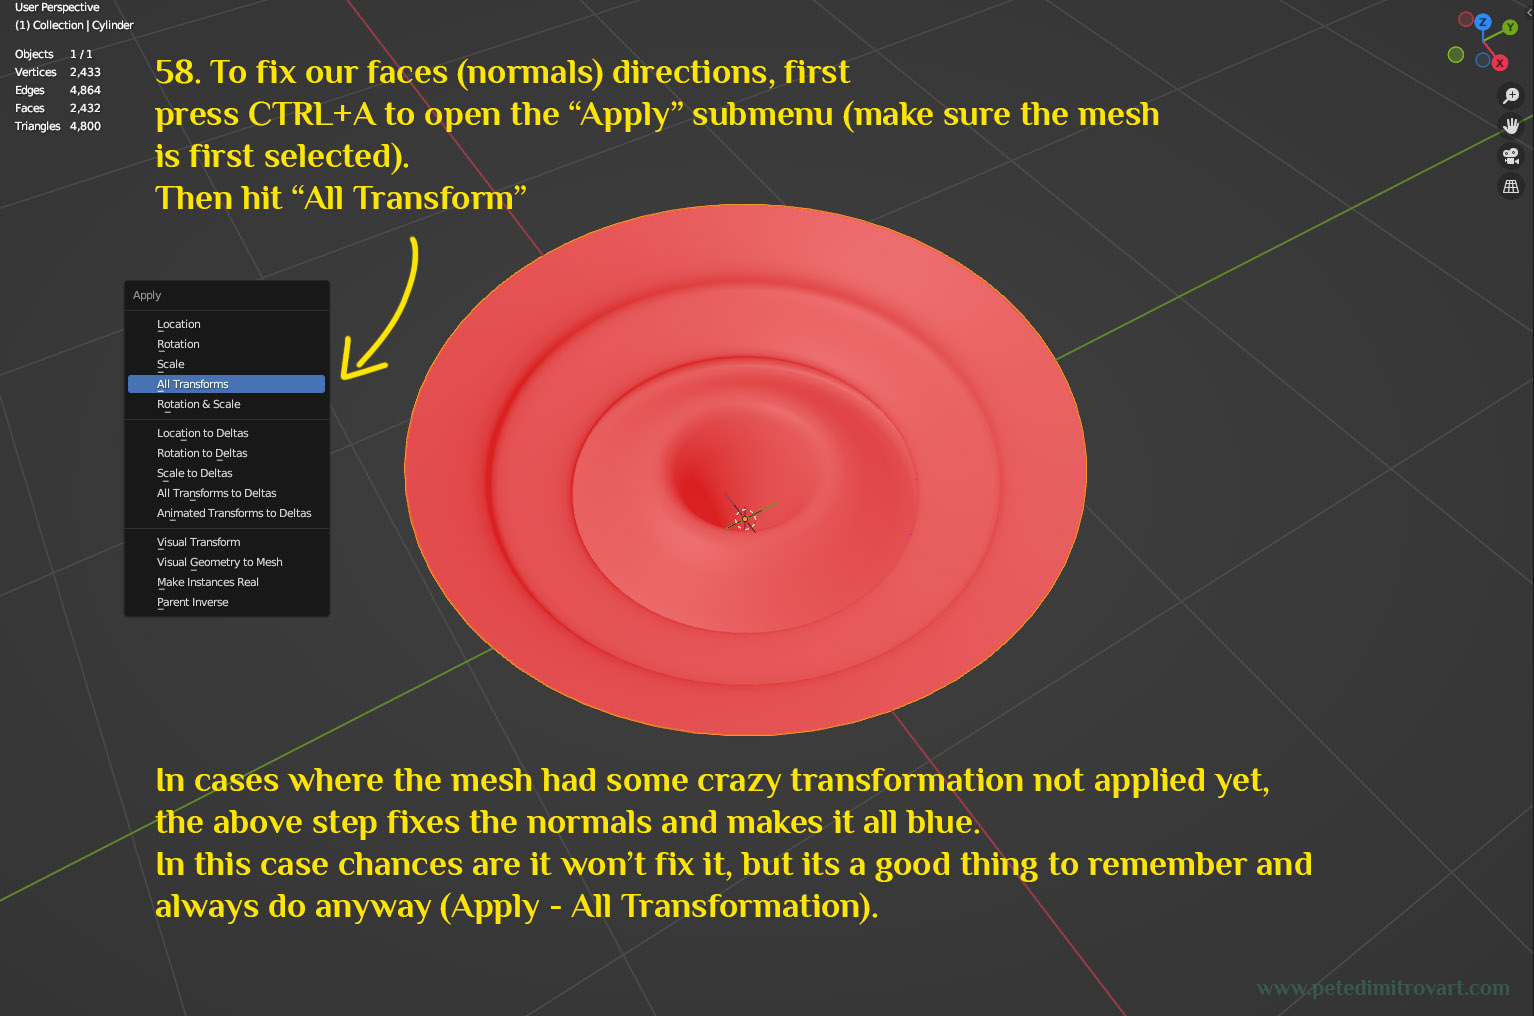 Image showing the red tinted mesh selected. Then “CTRL+A” pressed on the keyboard, bringing a menu on top of the screen, where the mouse is. That submenu is called “Apply” and has a list of commands like Apply–“Location, Rotation, Scale” etc. One of those is “All Transformation” and we select that.